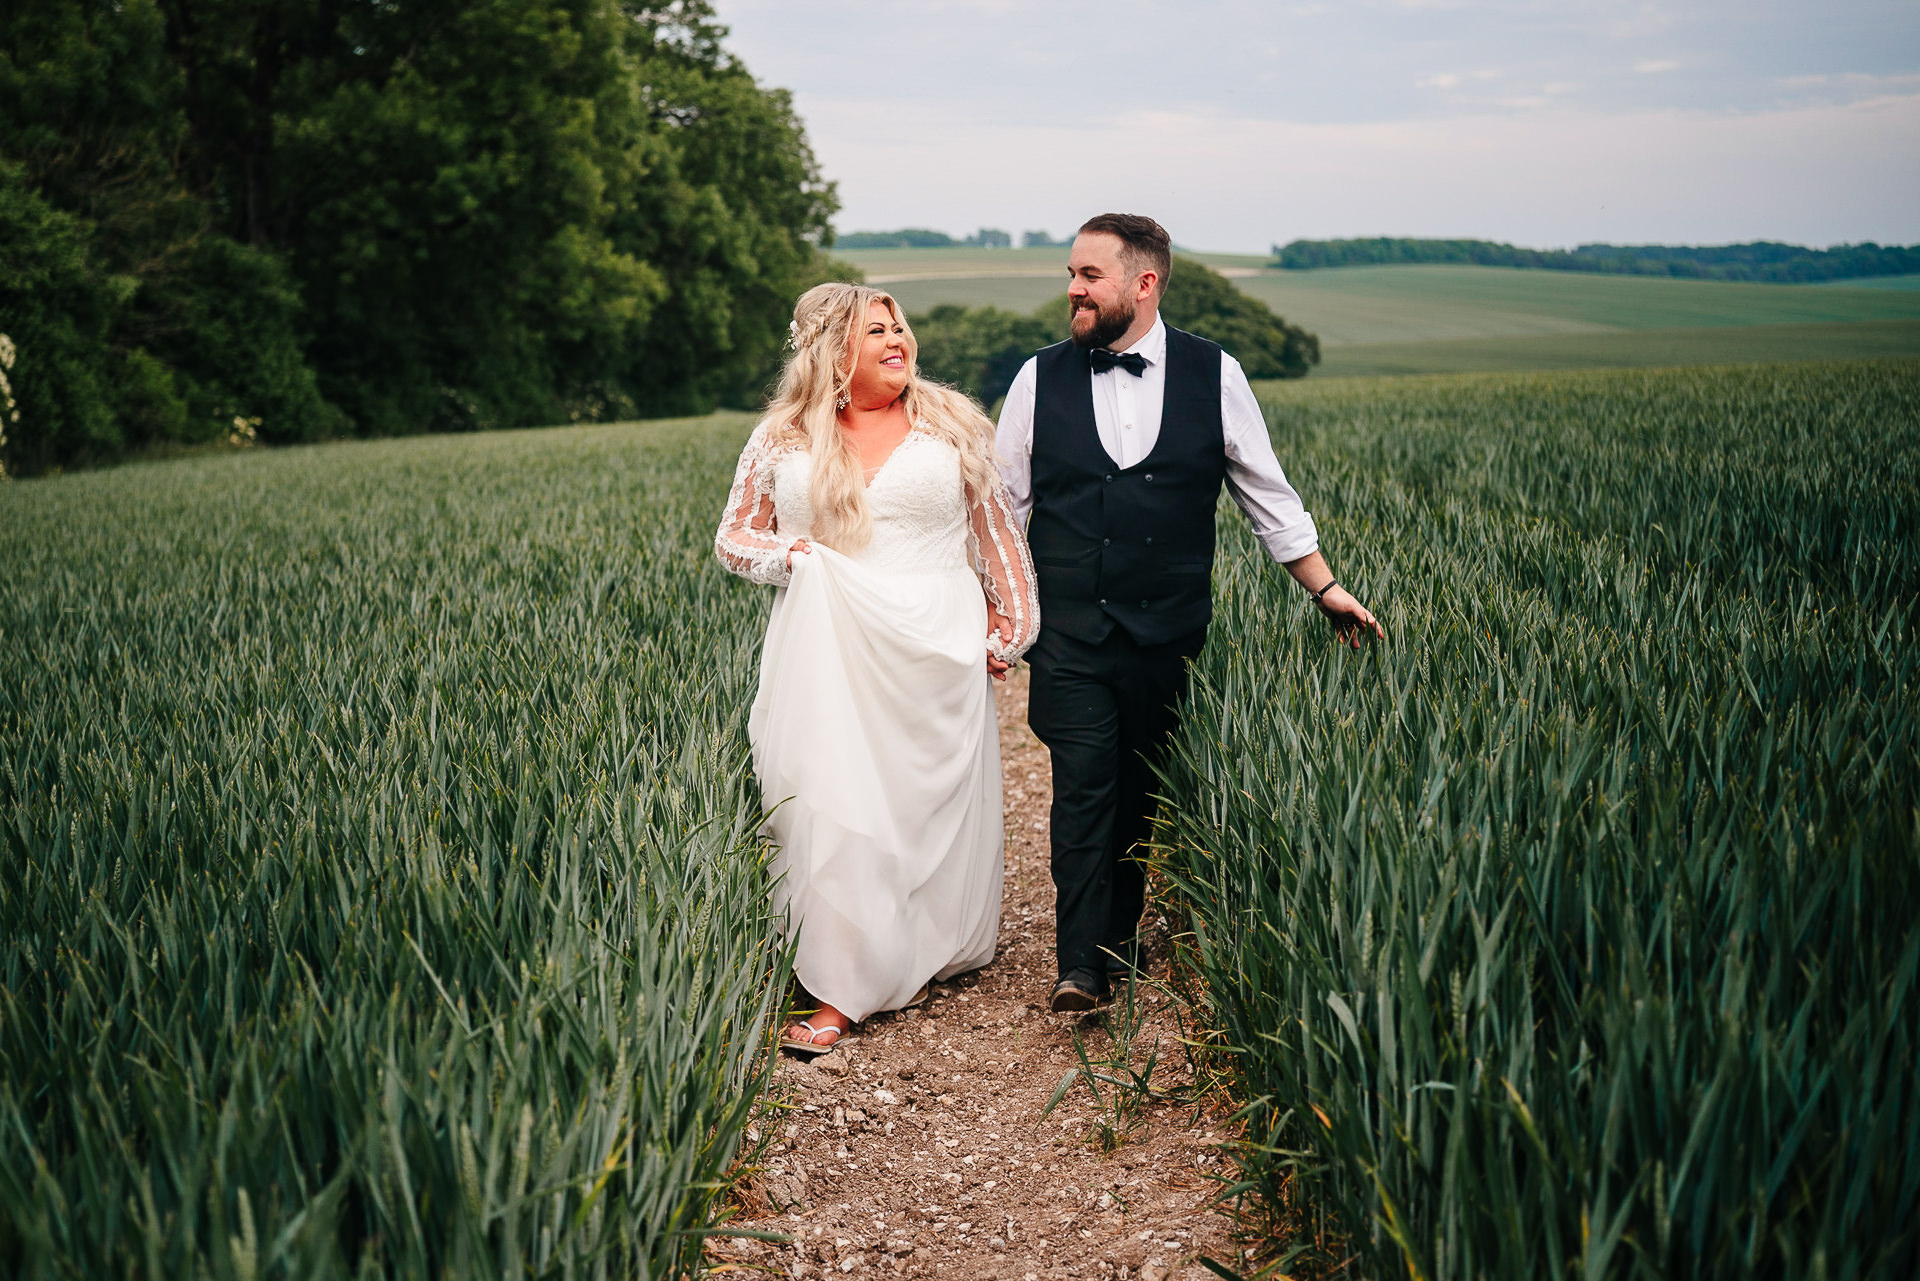 A bride and groom strolling hand in hand through a picturesque field of wheat, capturing the essence of natural beauty at The Gathering, a barn wedding venue.